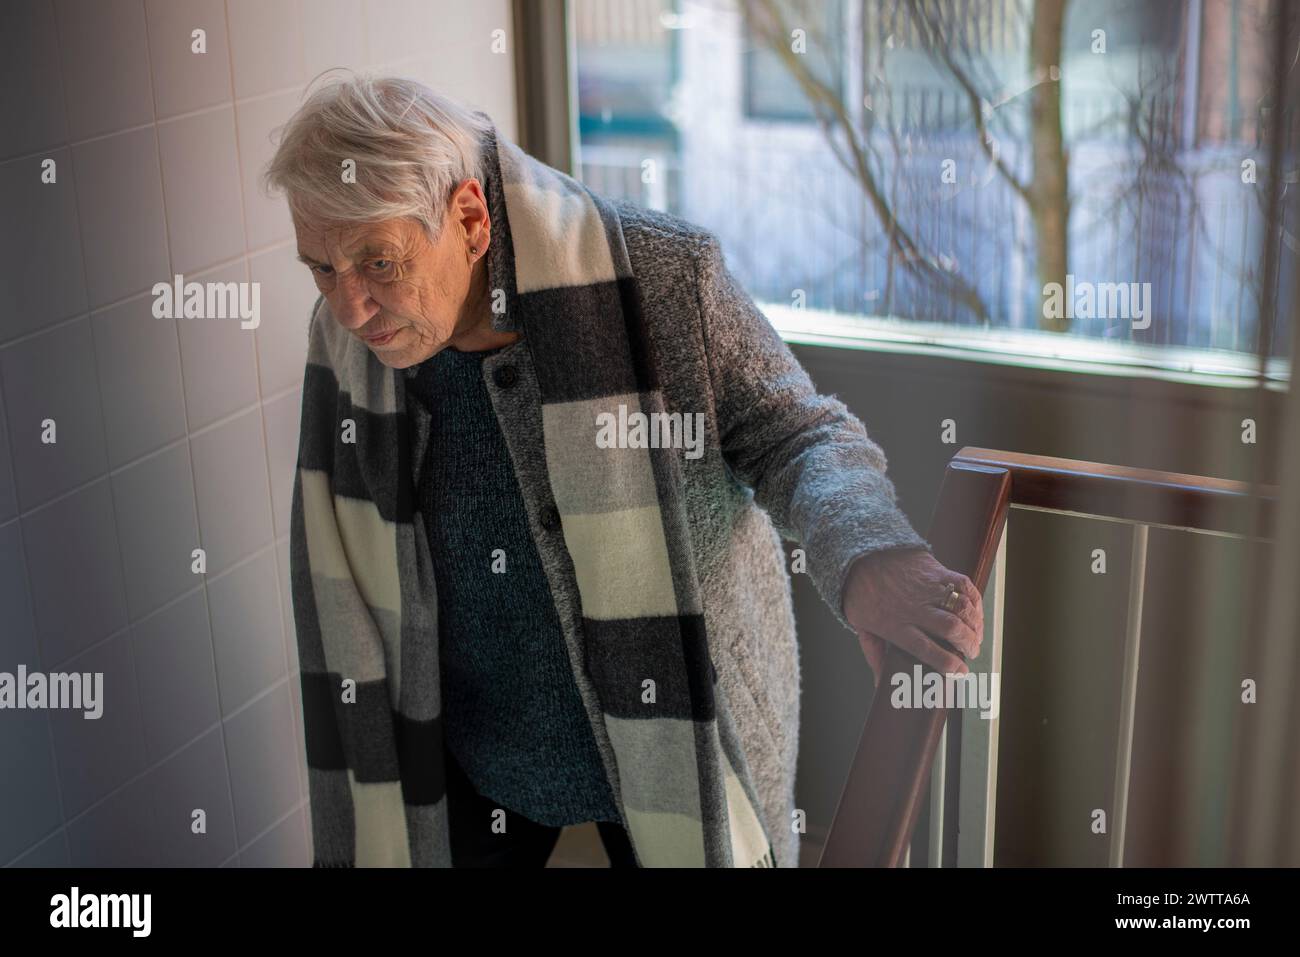 Elderly person standing by a staircase, bathed in soft natural light from a window. Stock Photo